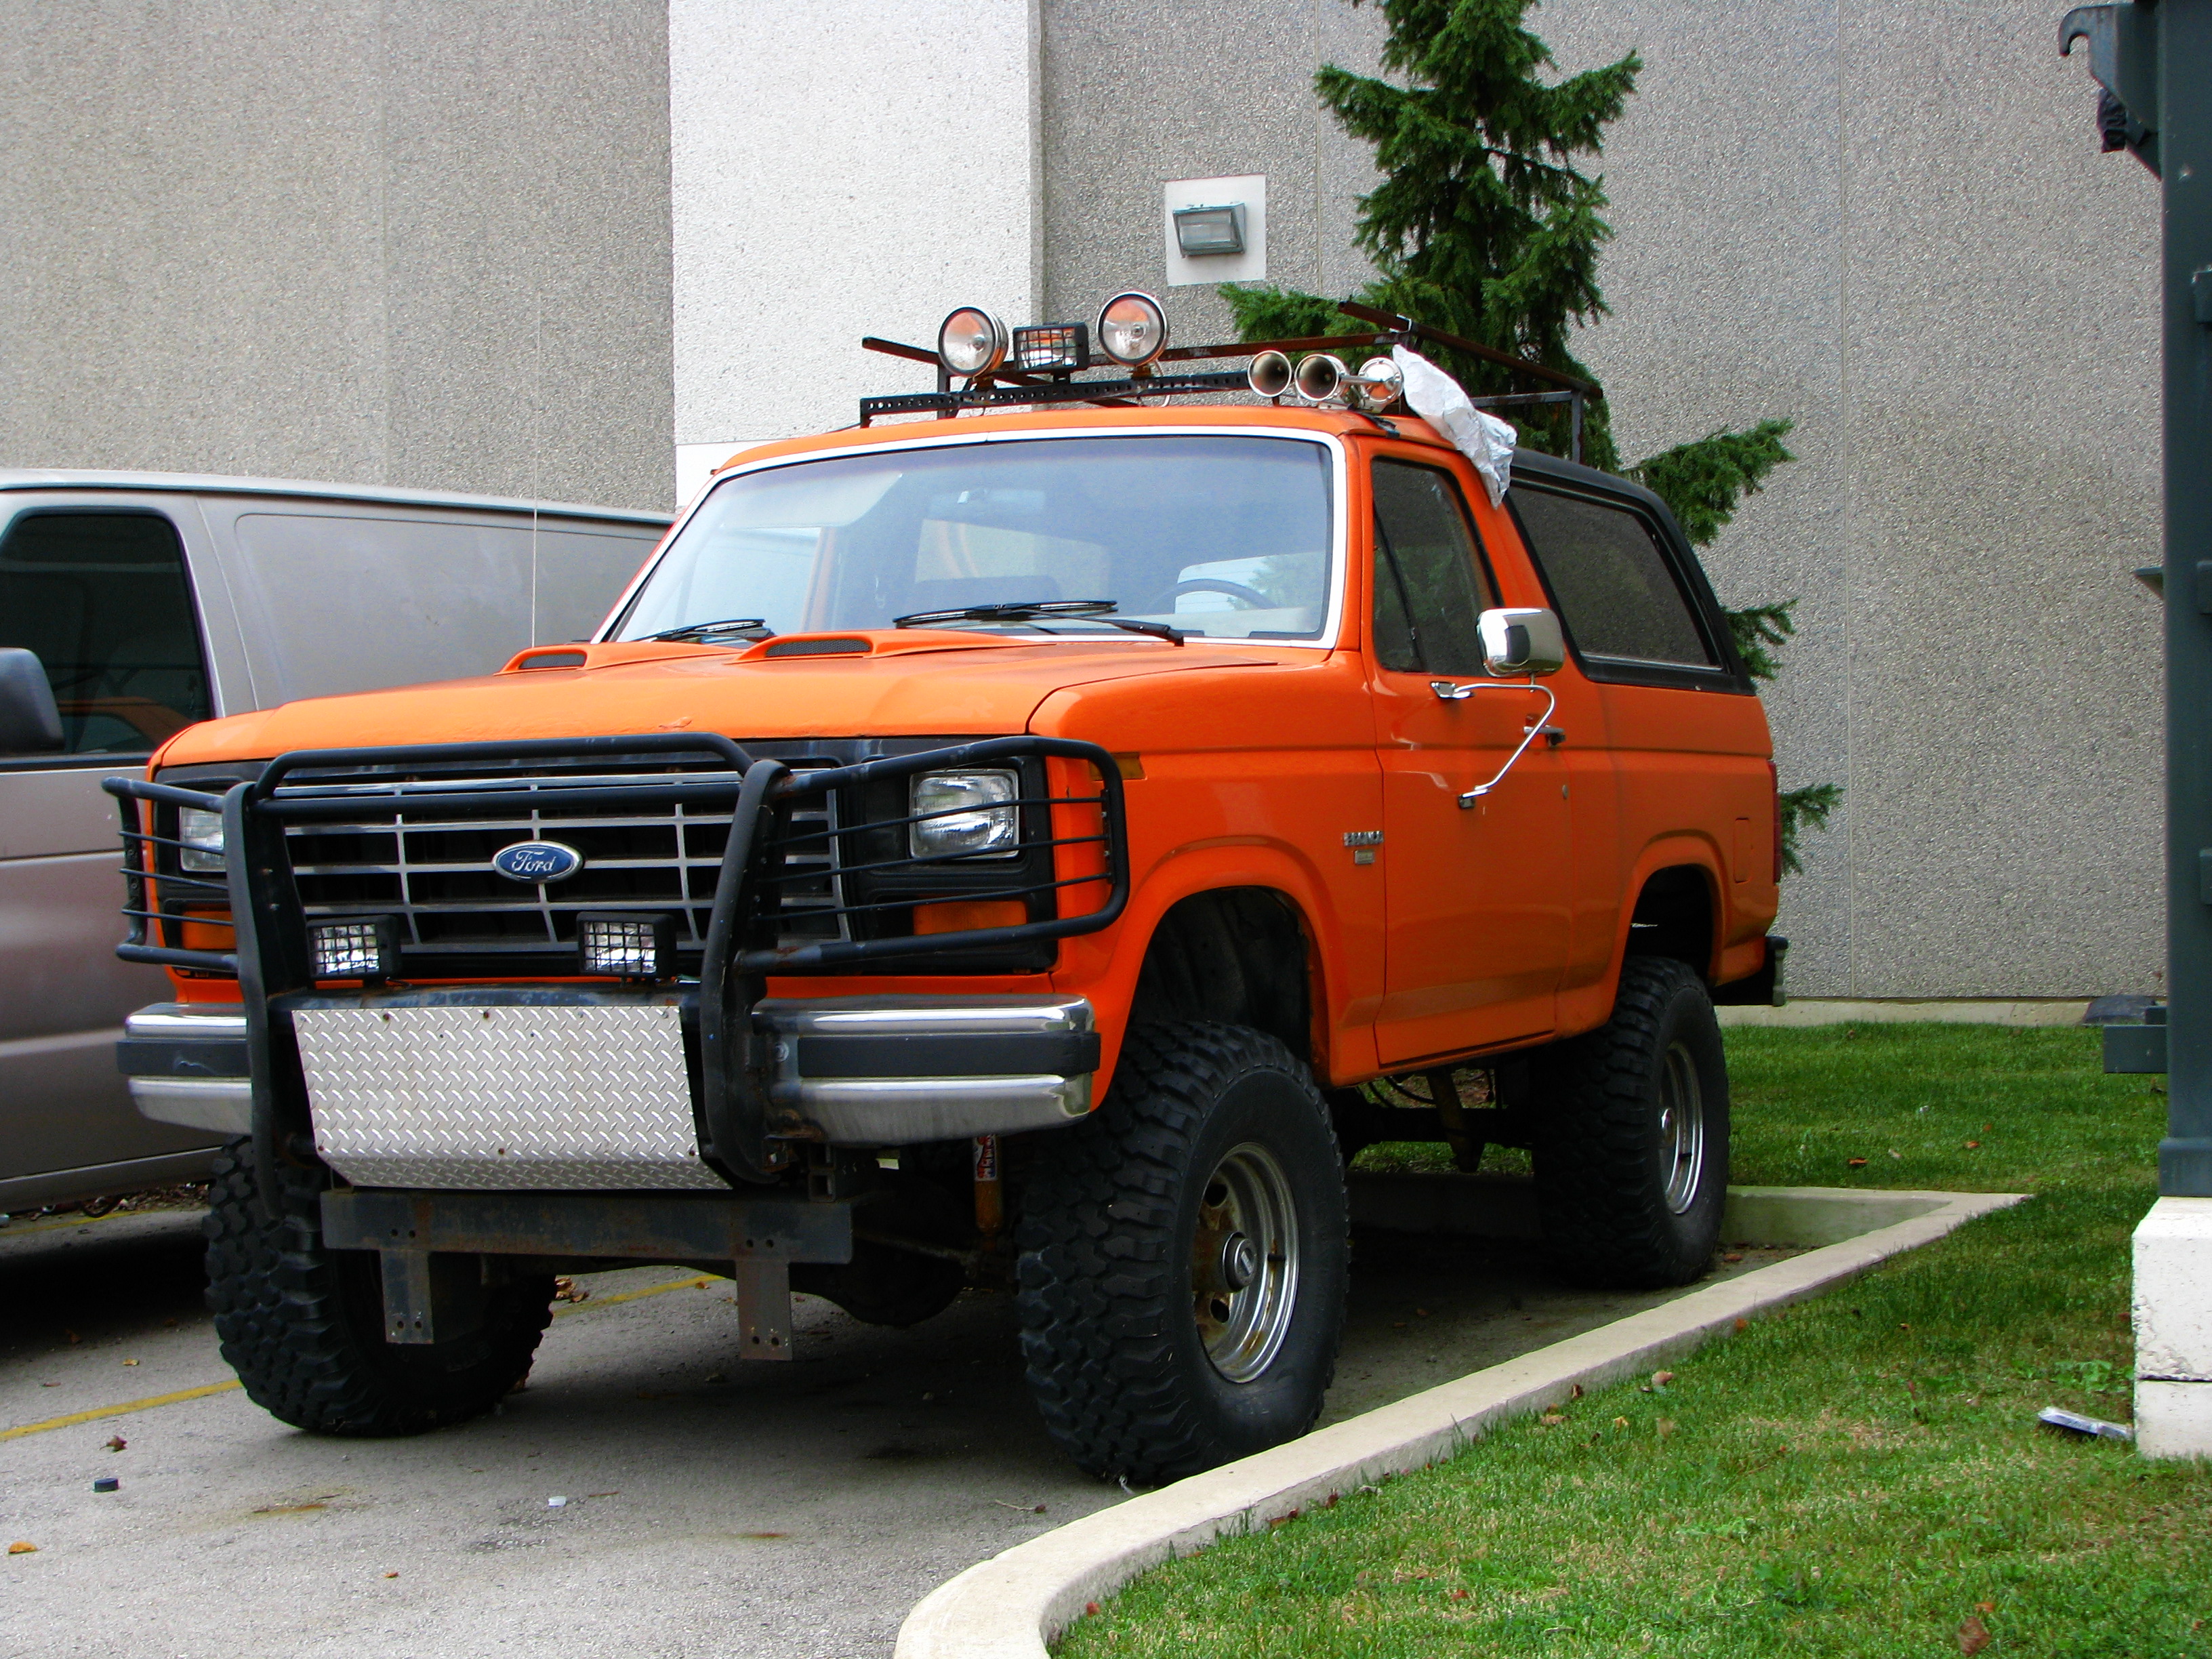 File:Ford Bronco Lifted (4006750973).jpg - Wikimedia Commons